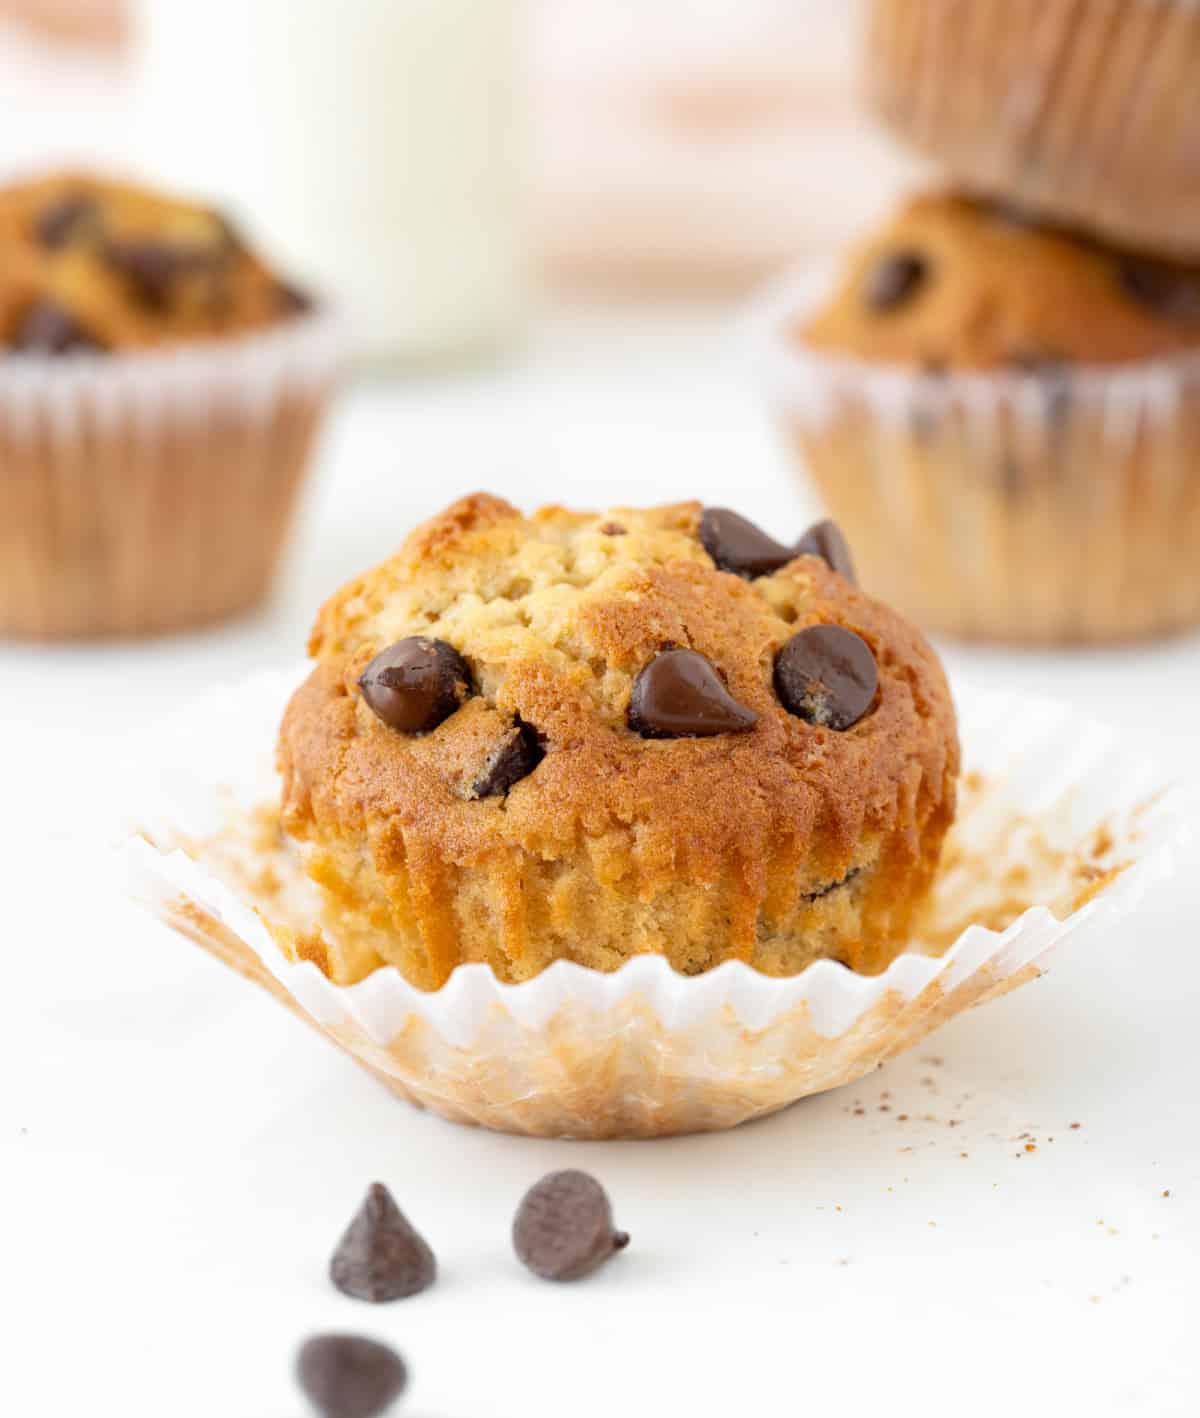 Opened paper liner with chocolate chip muffin on a white surface. More muffins in the background.